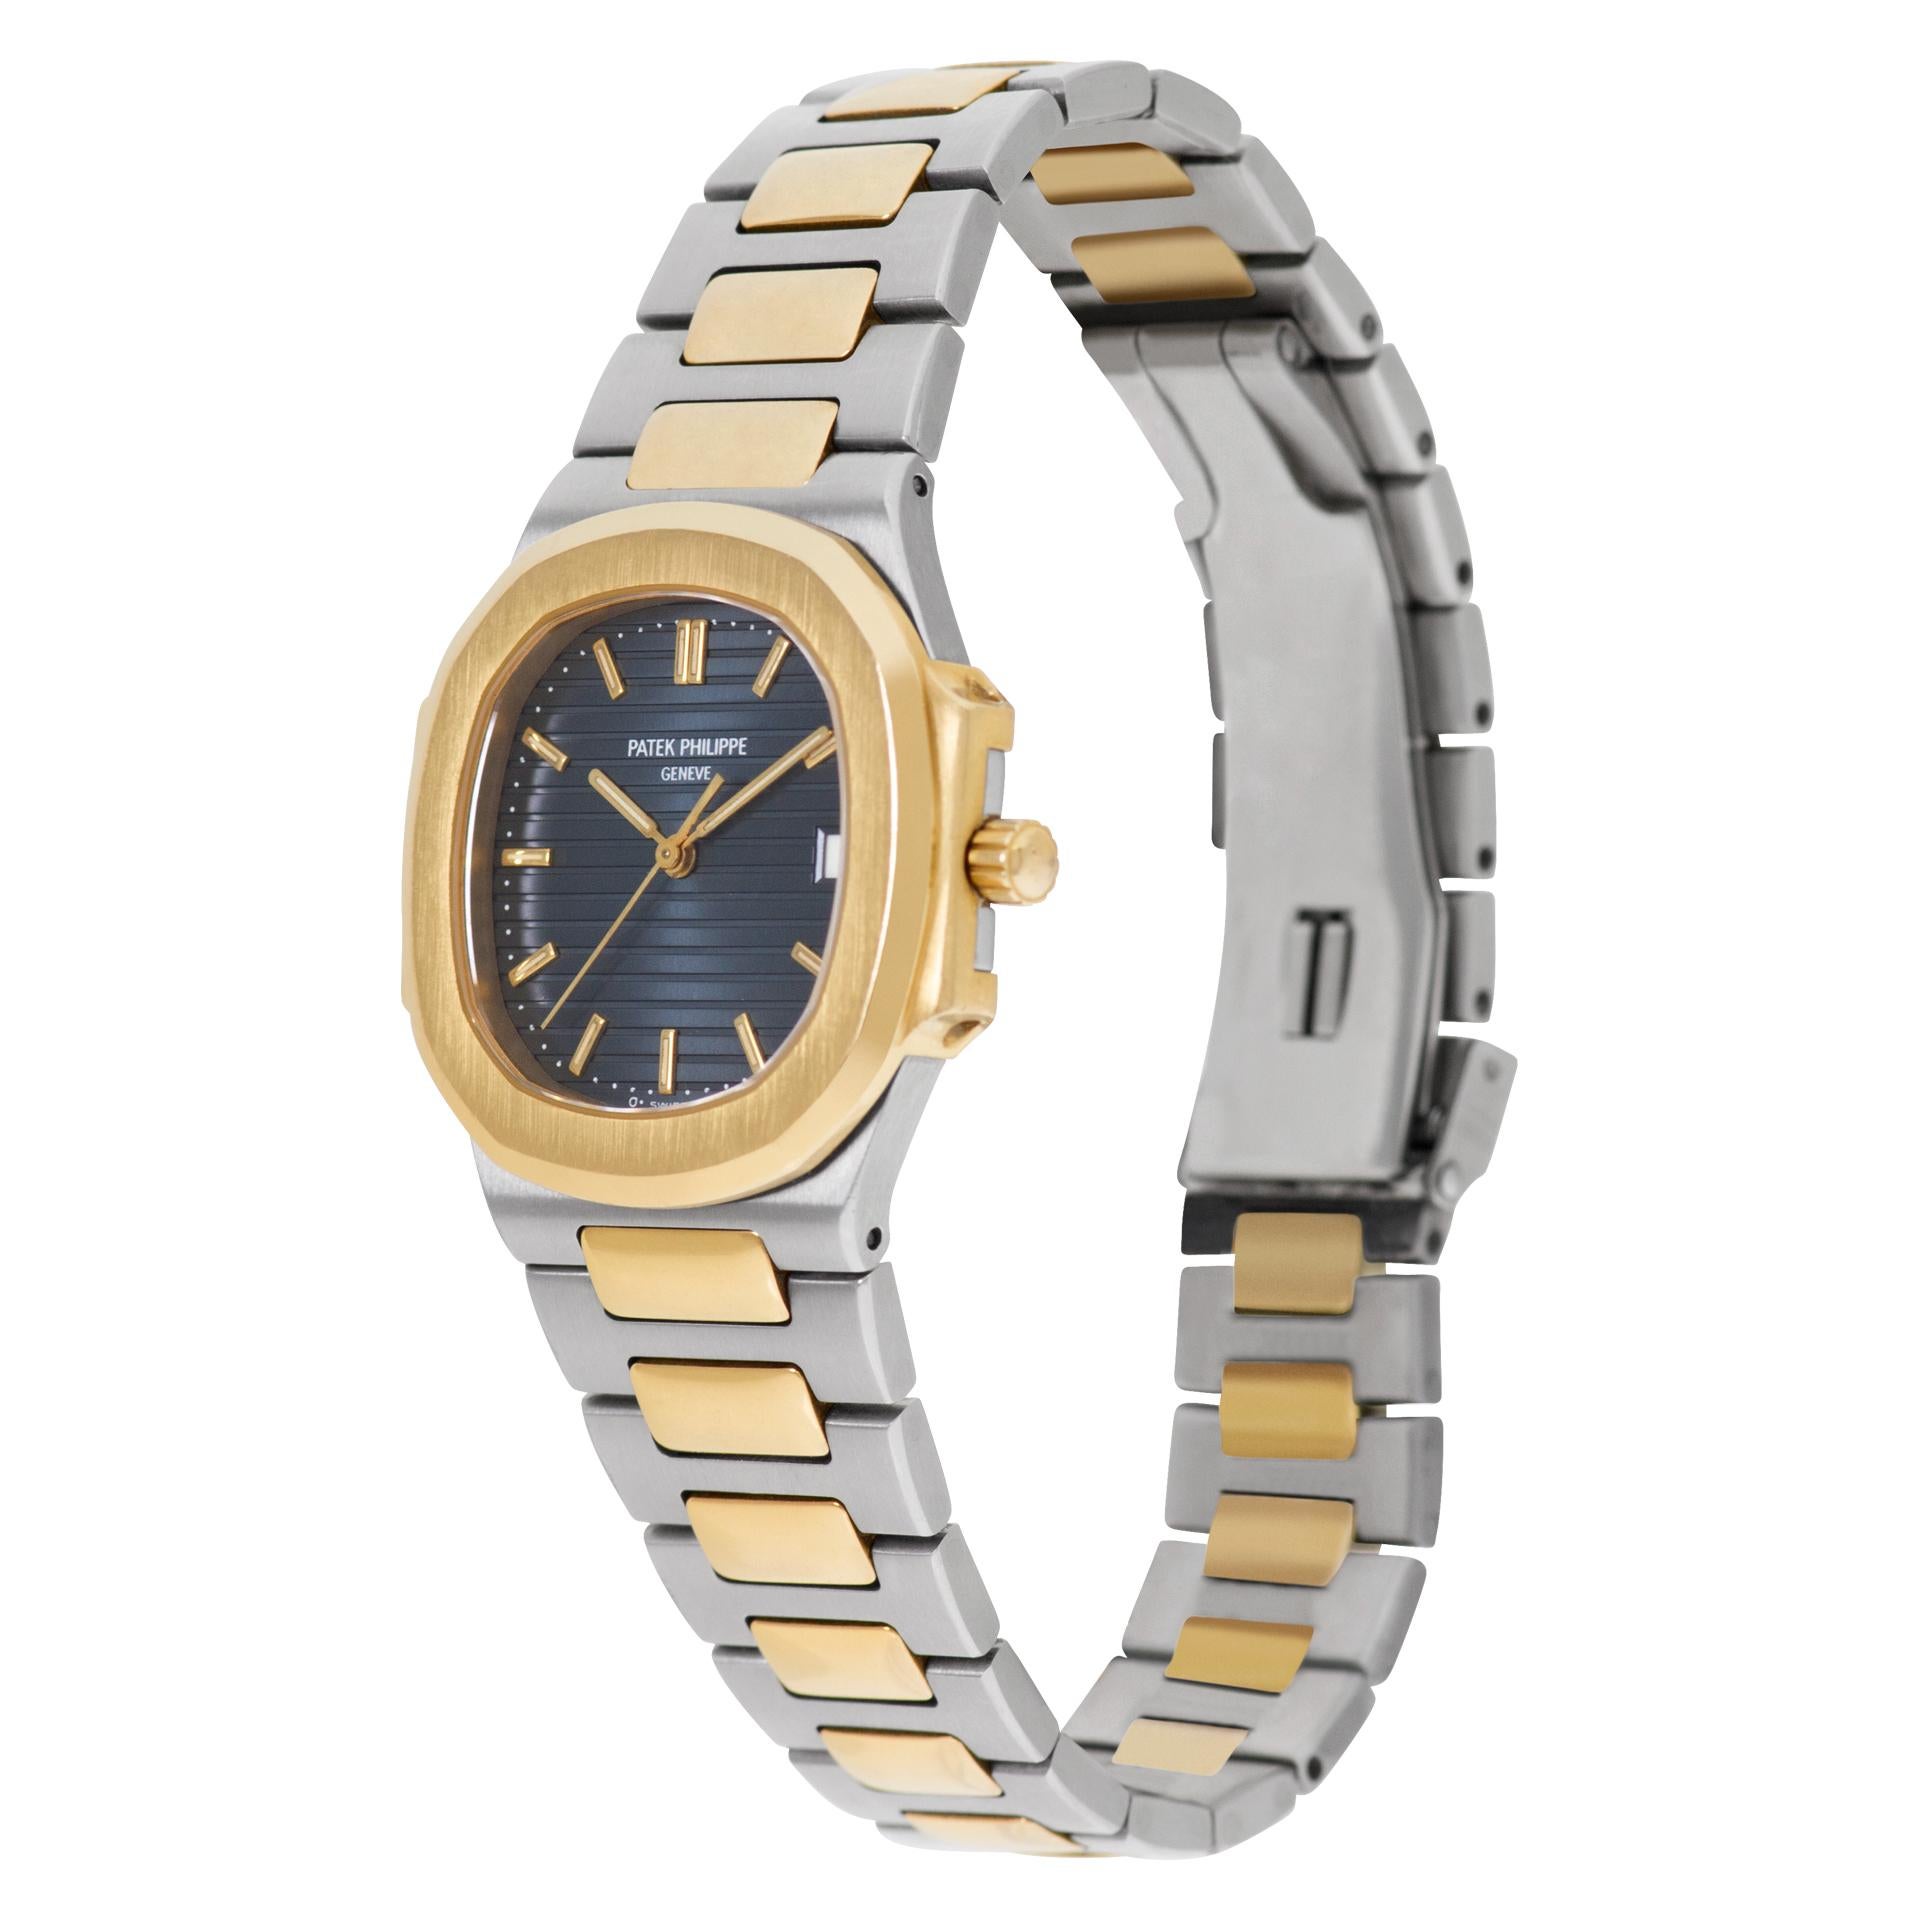 Patek Philippe Nautilus in 18k & stainless steel. Quartz w/ sweep seconds and date. 33 mm case size. With PP pouch. Ref 3900. Fine Pre-owned Patek Philippe Watch. Certified preowned Sport Patek Philippe Nautilus 3900 watch is made out of Stainless